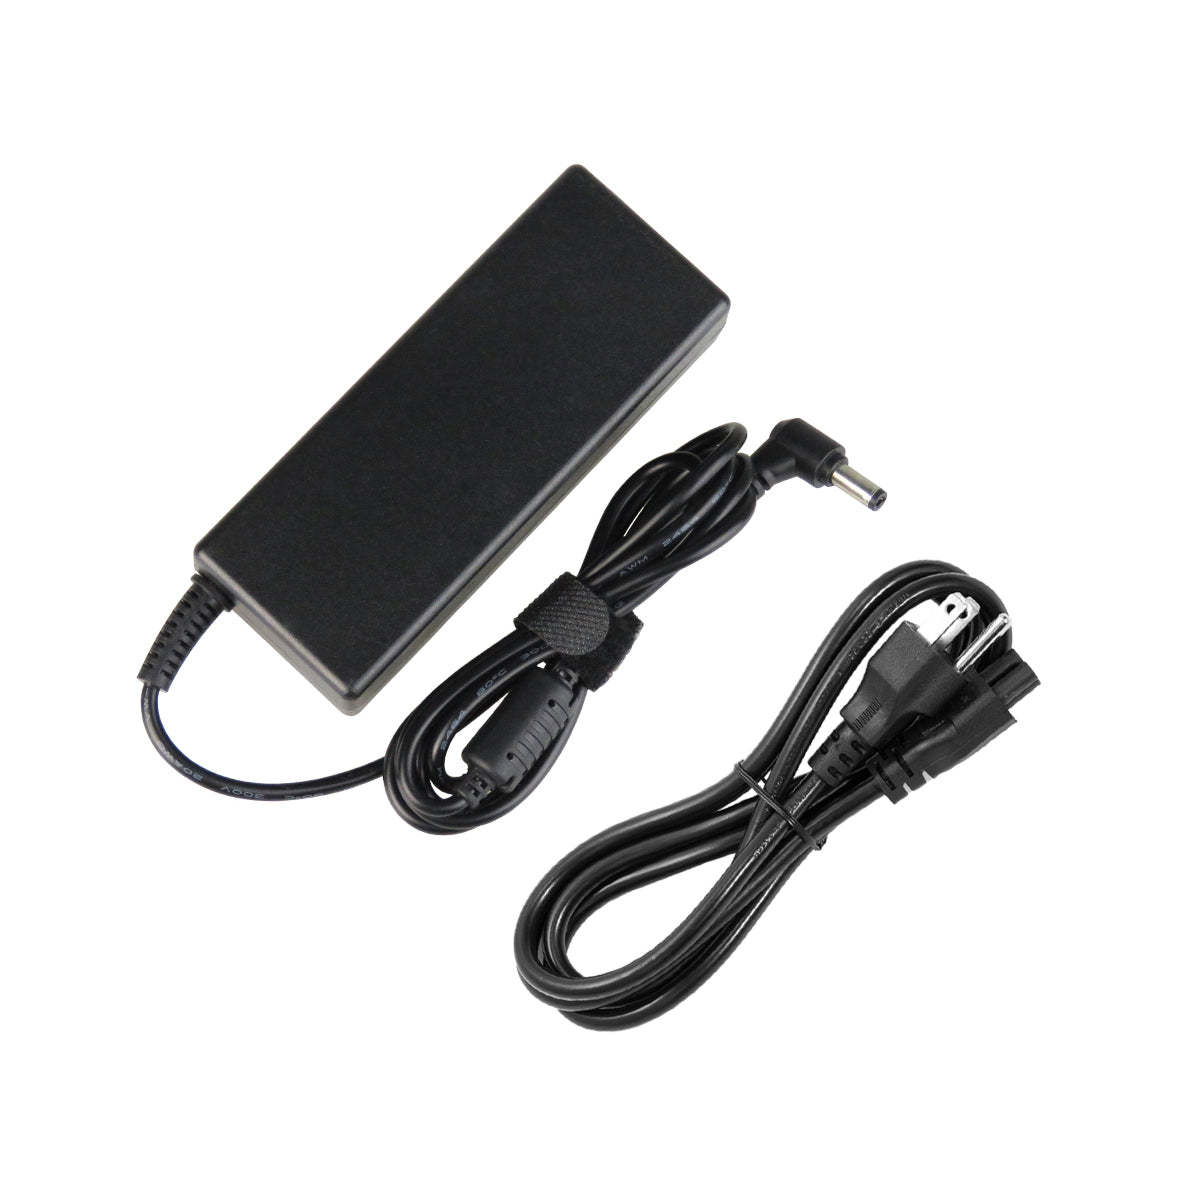 AC Adapter Charger for ASUS K45DR Notebook.